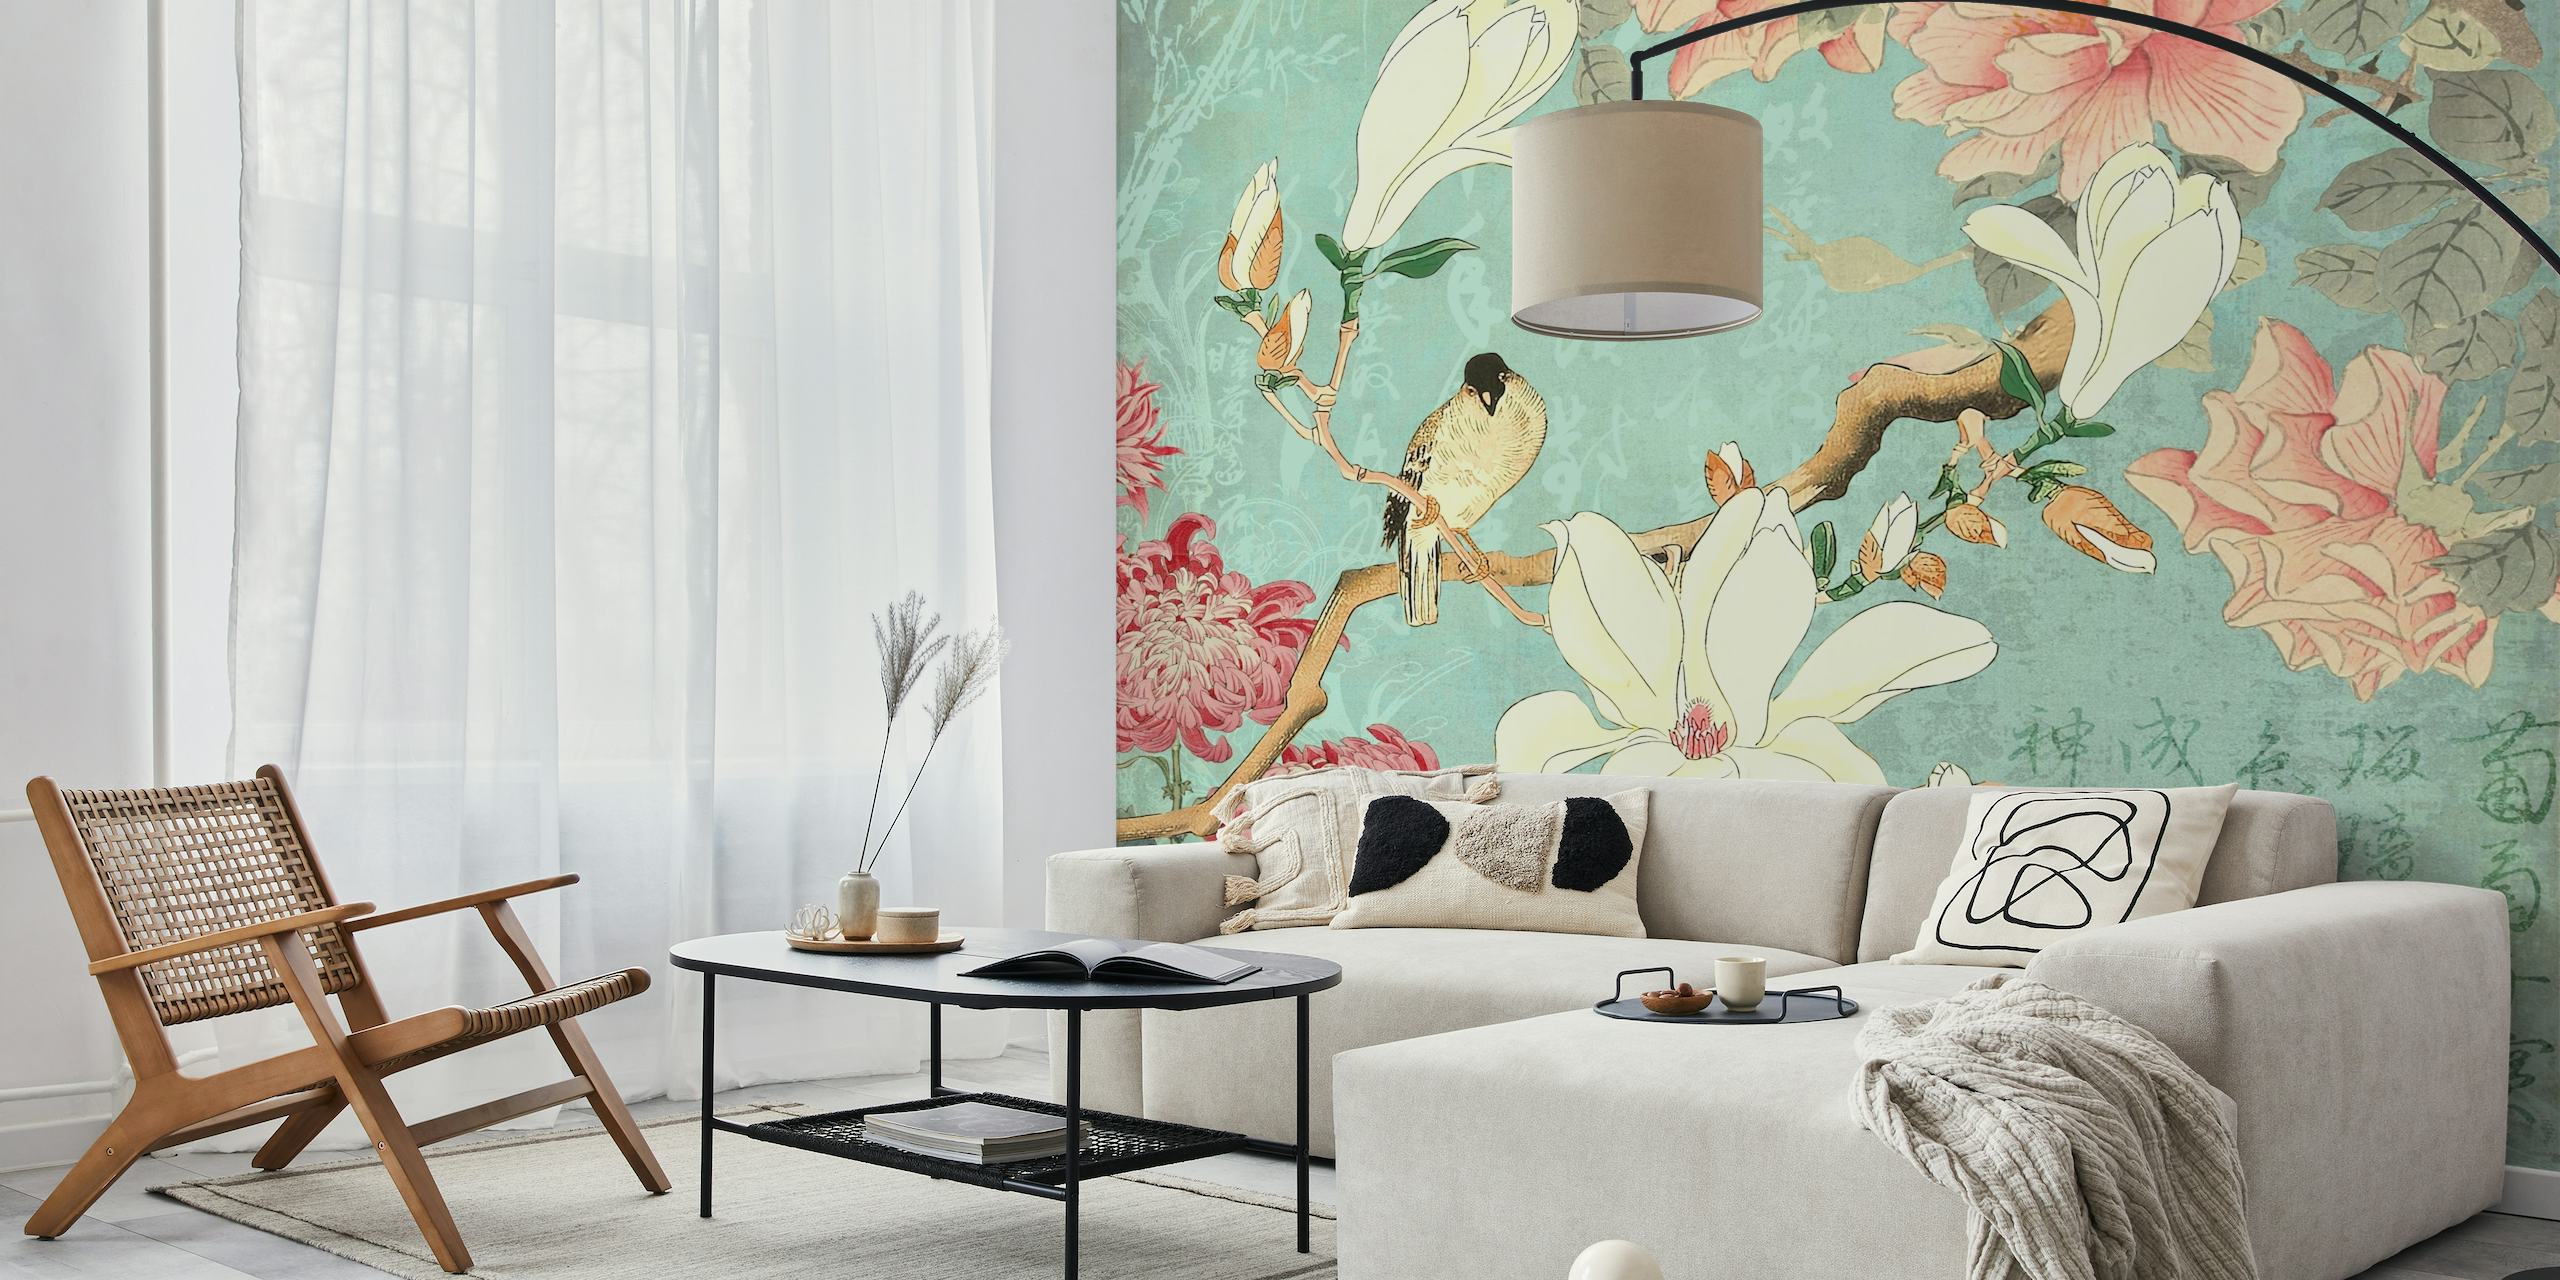 Wall mural of a Chinese Magnolia Garden with birds and blossoms on a teal background